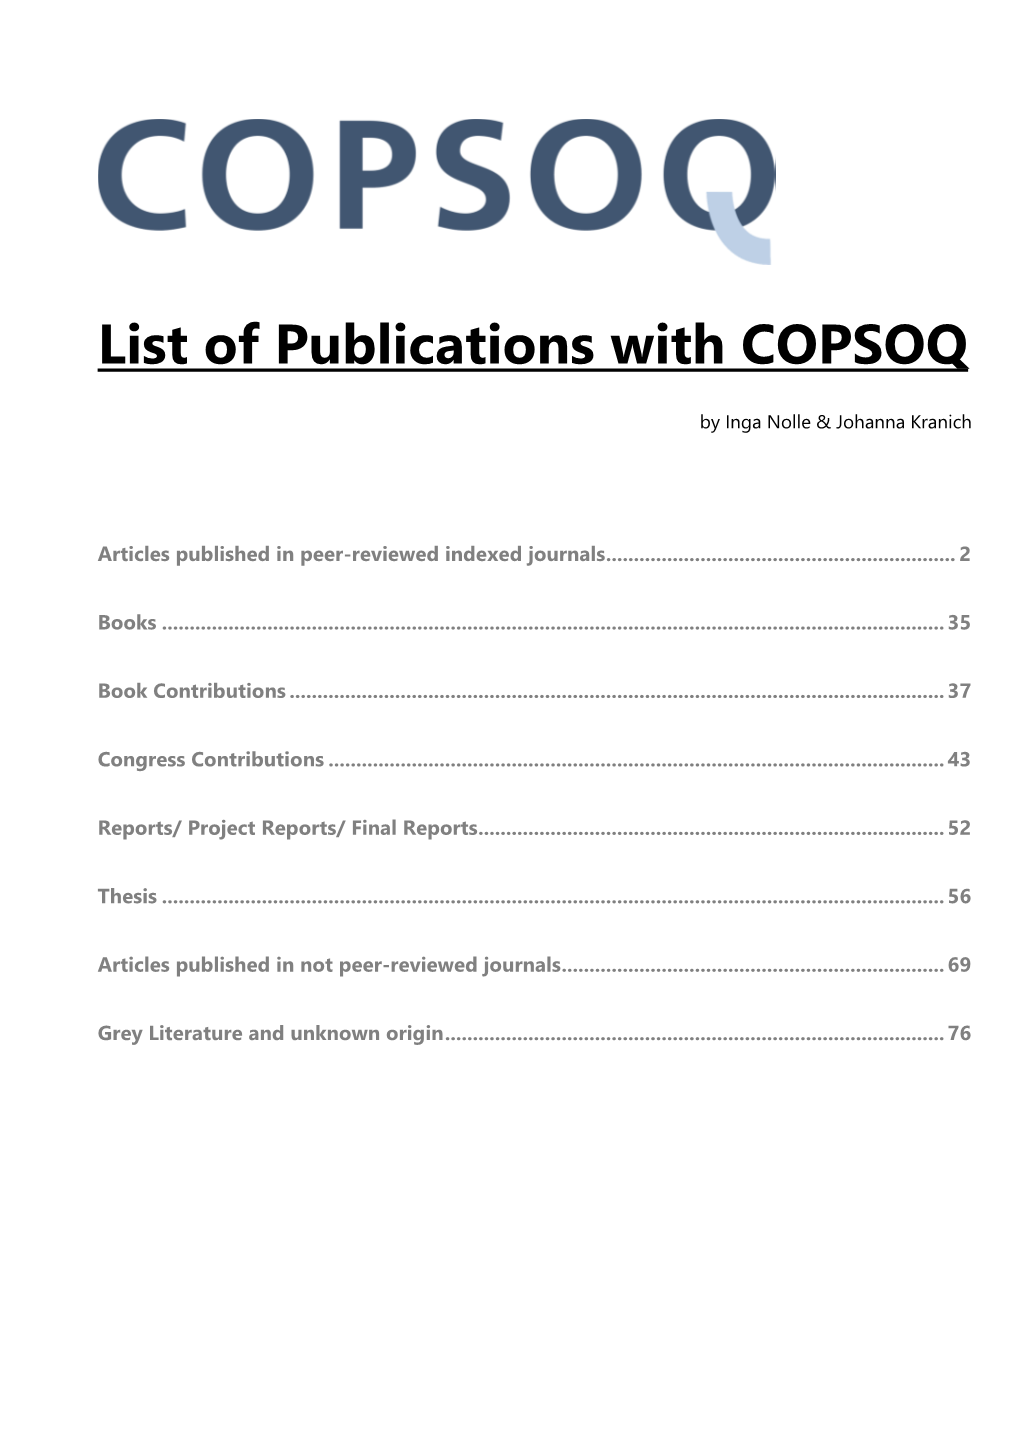 List of Publications with COPSOQ